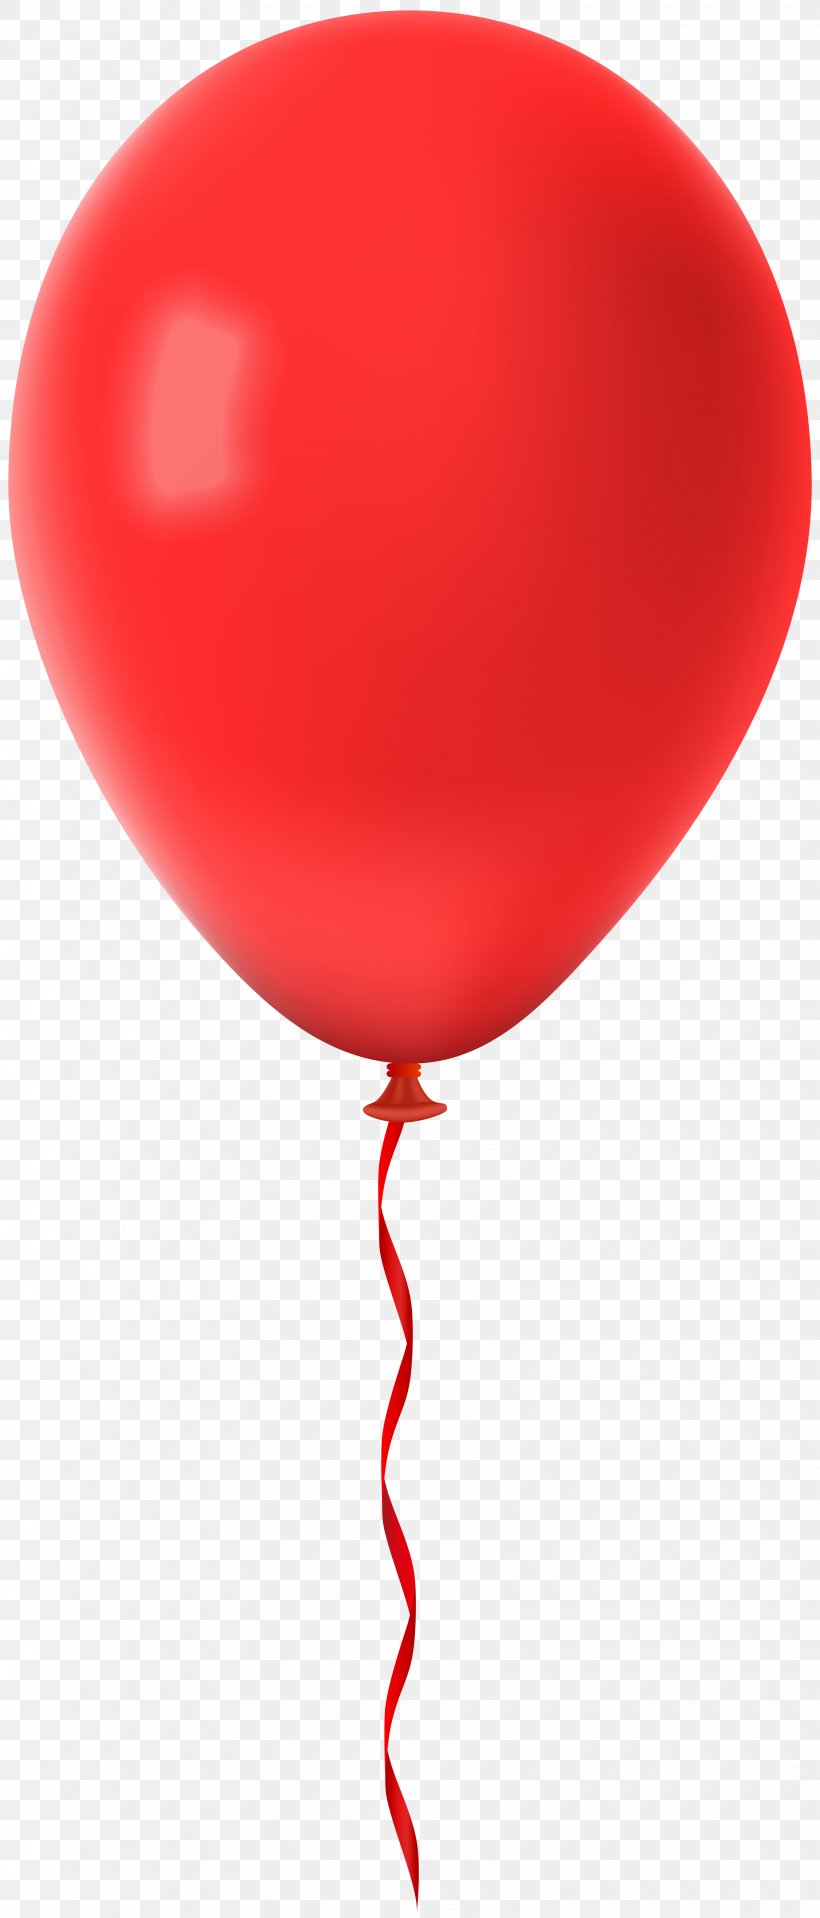 Clip Art Balloon Image Openclipart, PNG, 3420x8000px, Balloon, Art, Collage, Red, Red Balloon Download Free